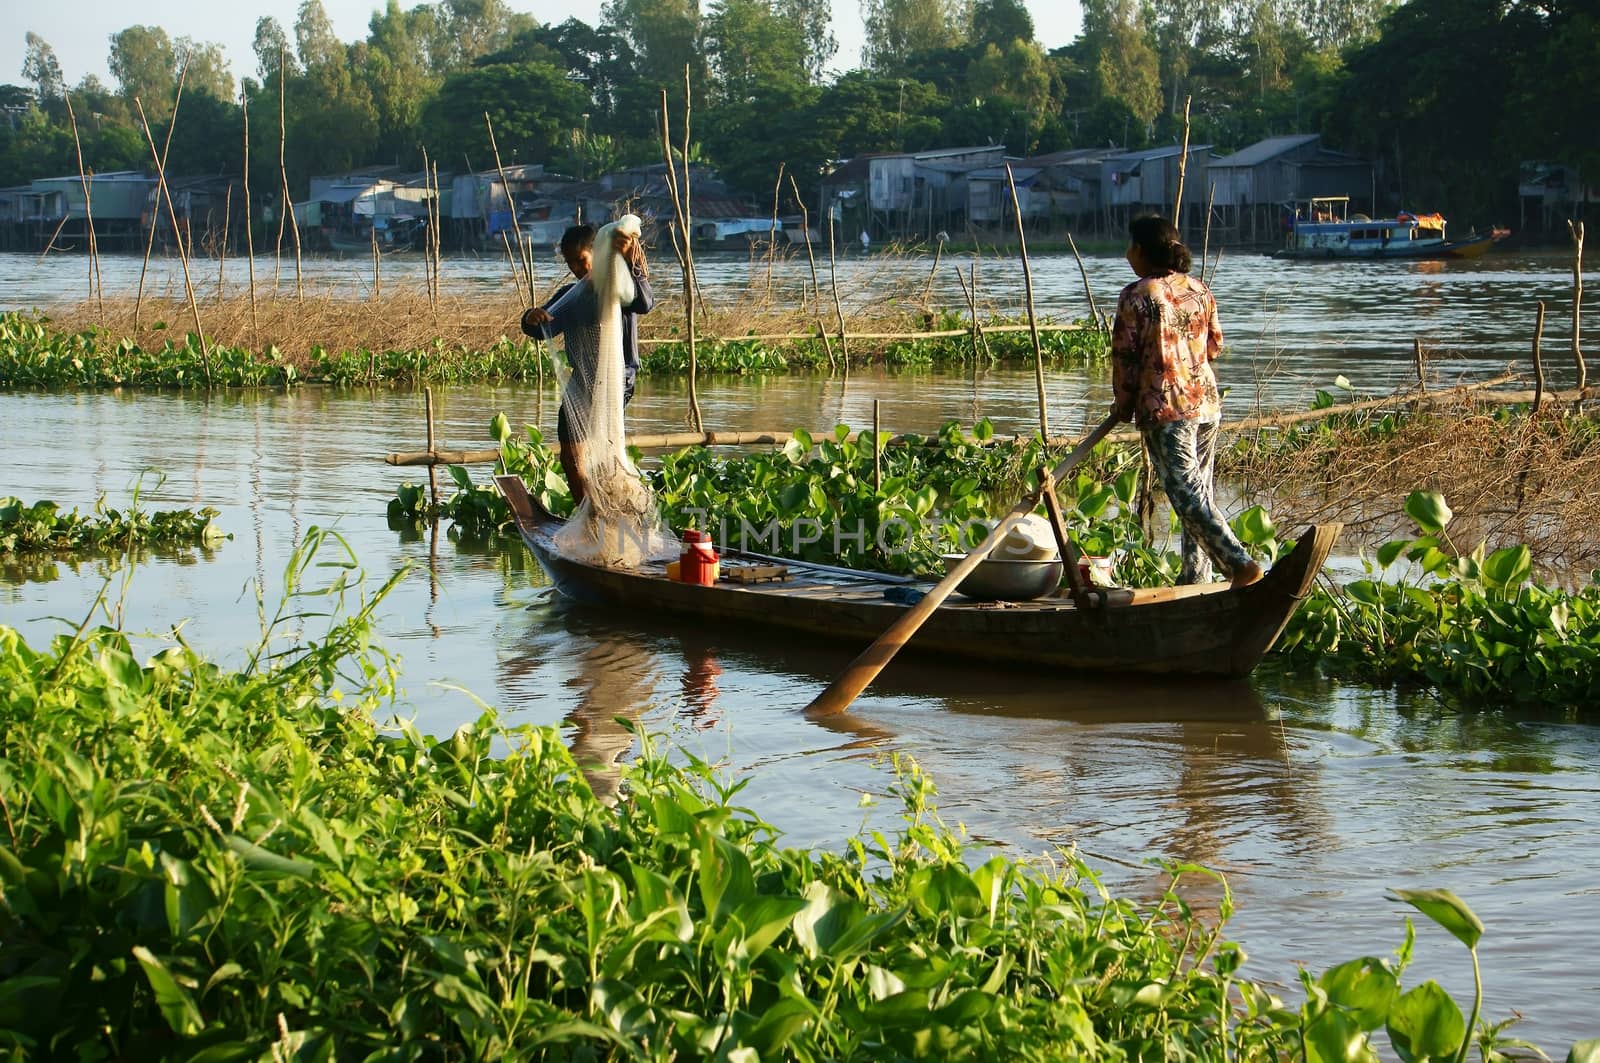 DONG THAP, VIET NAM- NOVEMBER 12: Couple of fisherman catch fish on river in flood season, the woman rowing the row boat, the man do fishing, river cover by water hyacinth in Viet Nam on Nov 12, 2013